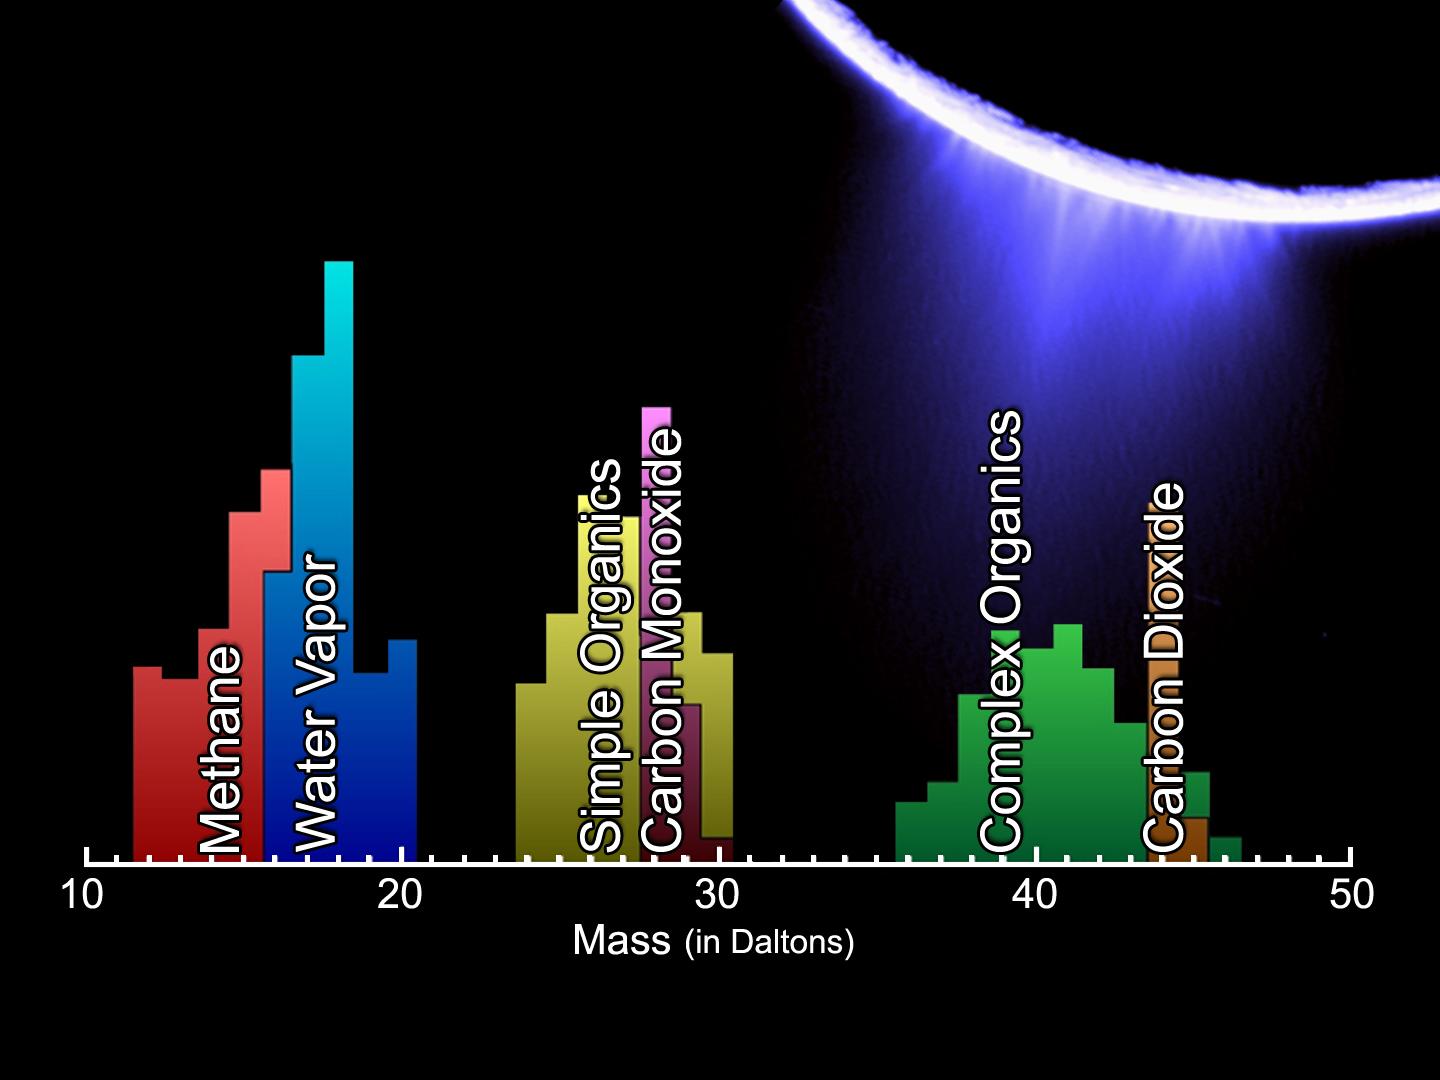 This mass spectrum shows the chemical constituents sampled in Enceladus' plume